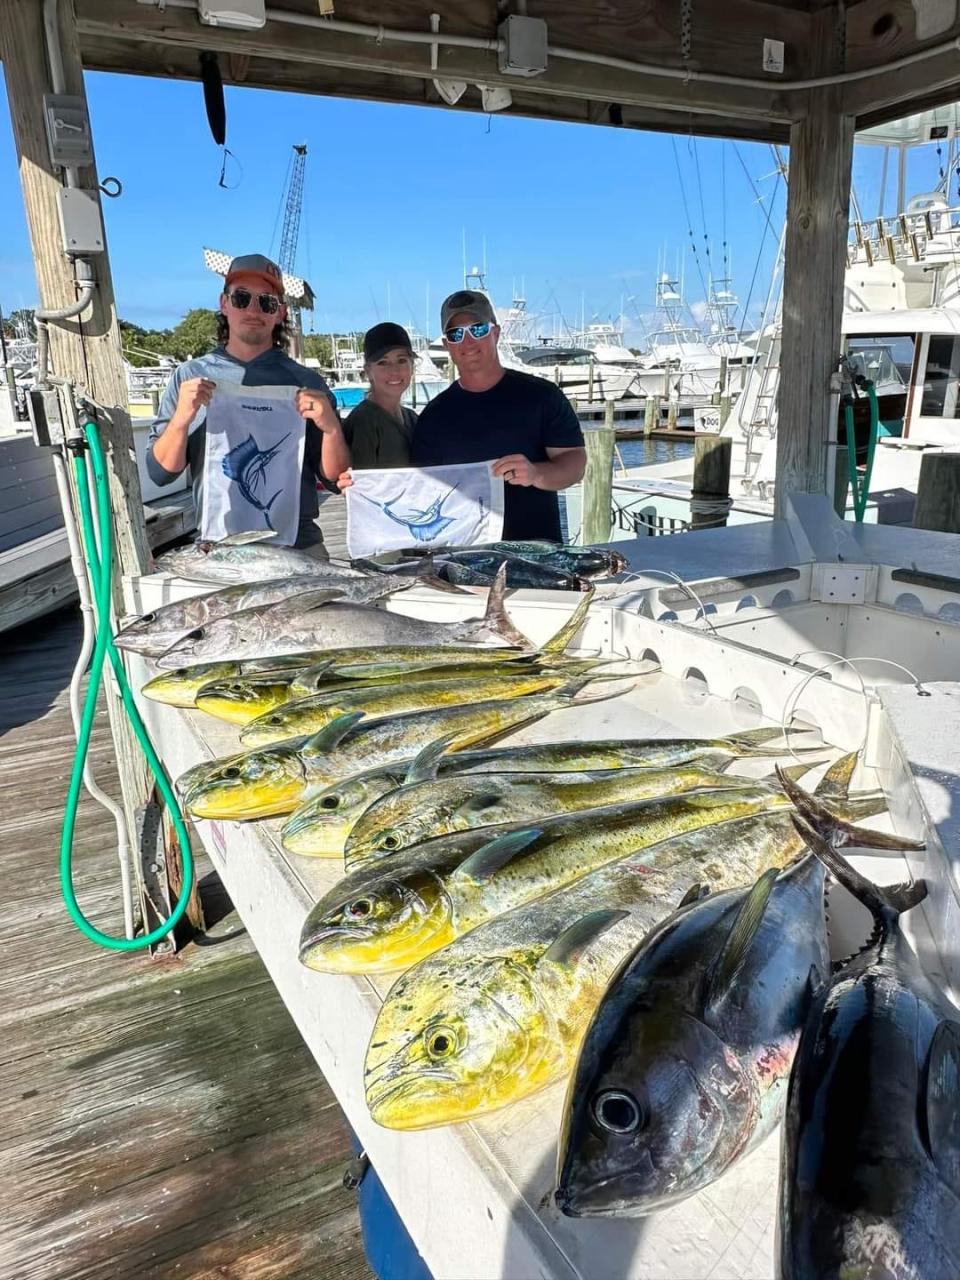 Dolphin, blackfin tuna and catch and release sailfish have been in the mix for early November customers of Off the Chain charters in Stuart.